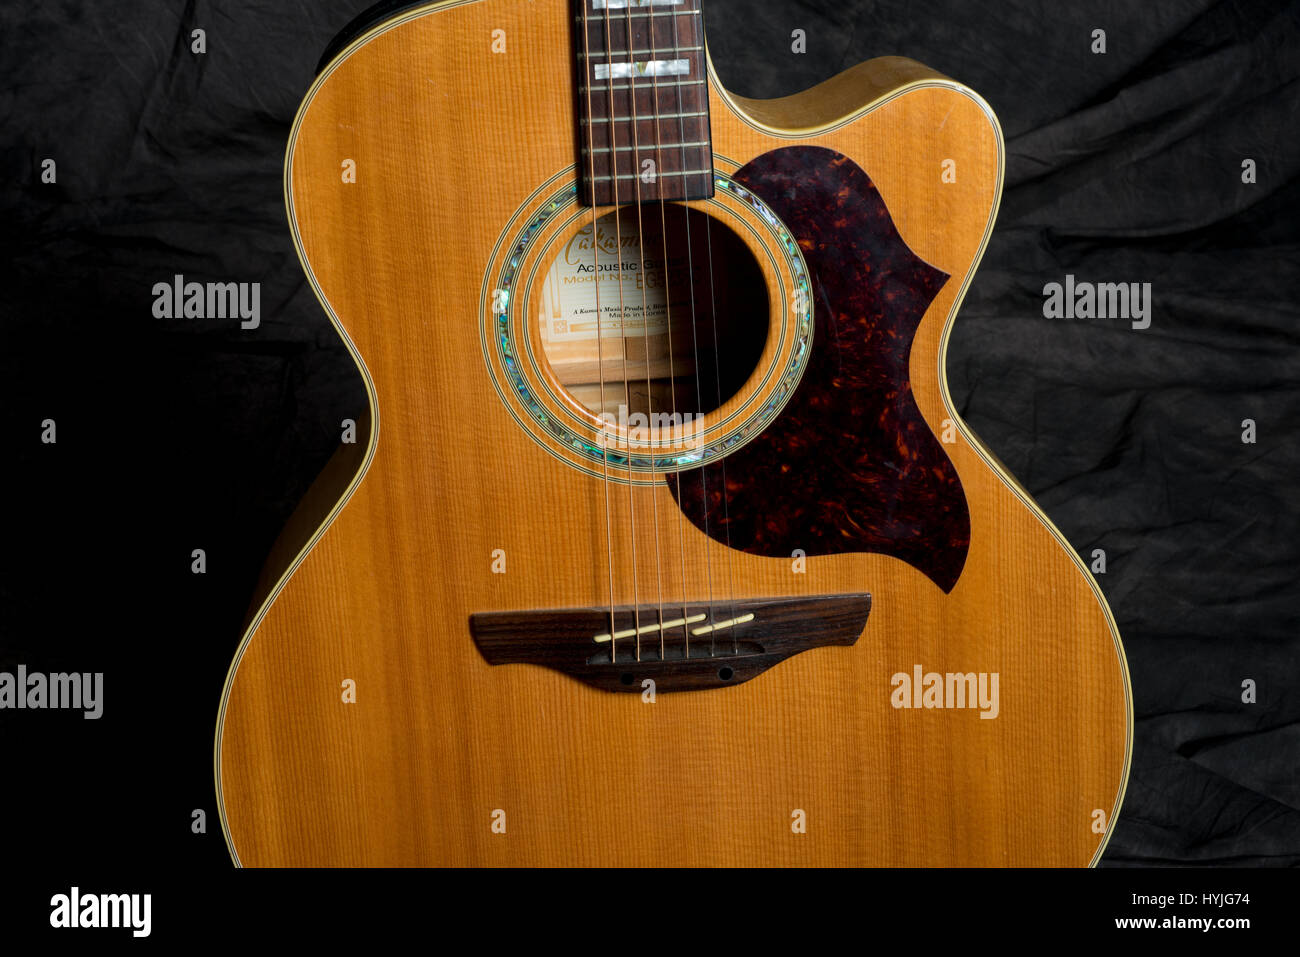 six string acoustic  guitar Stock Photo